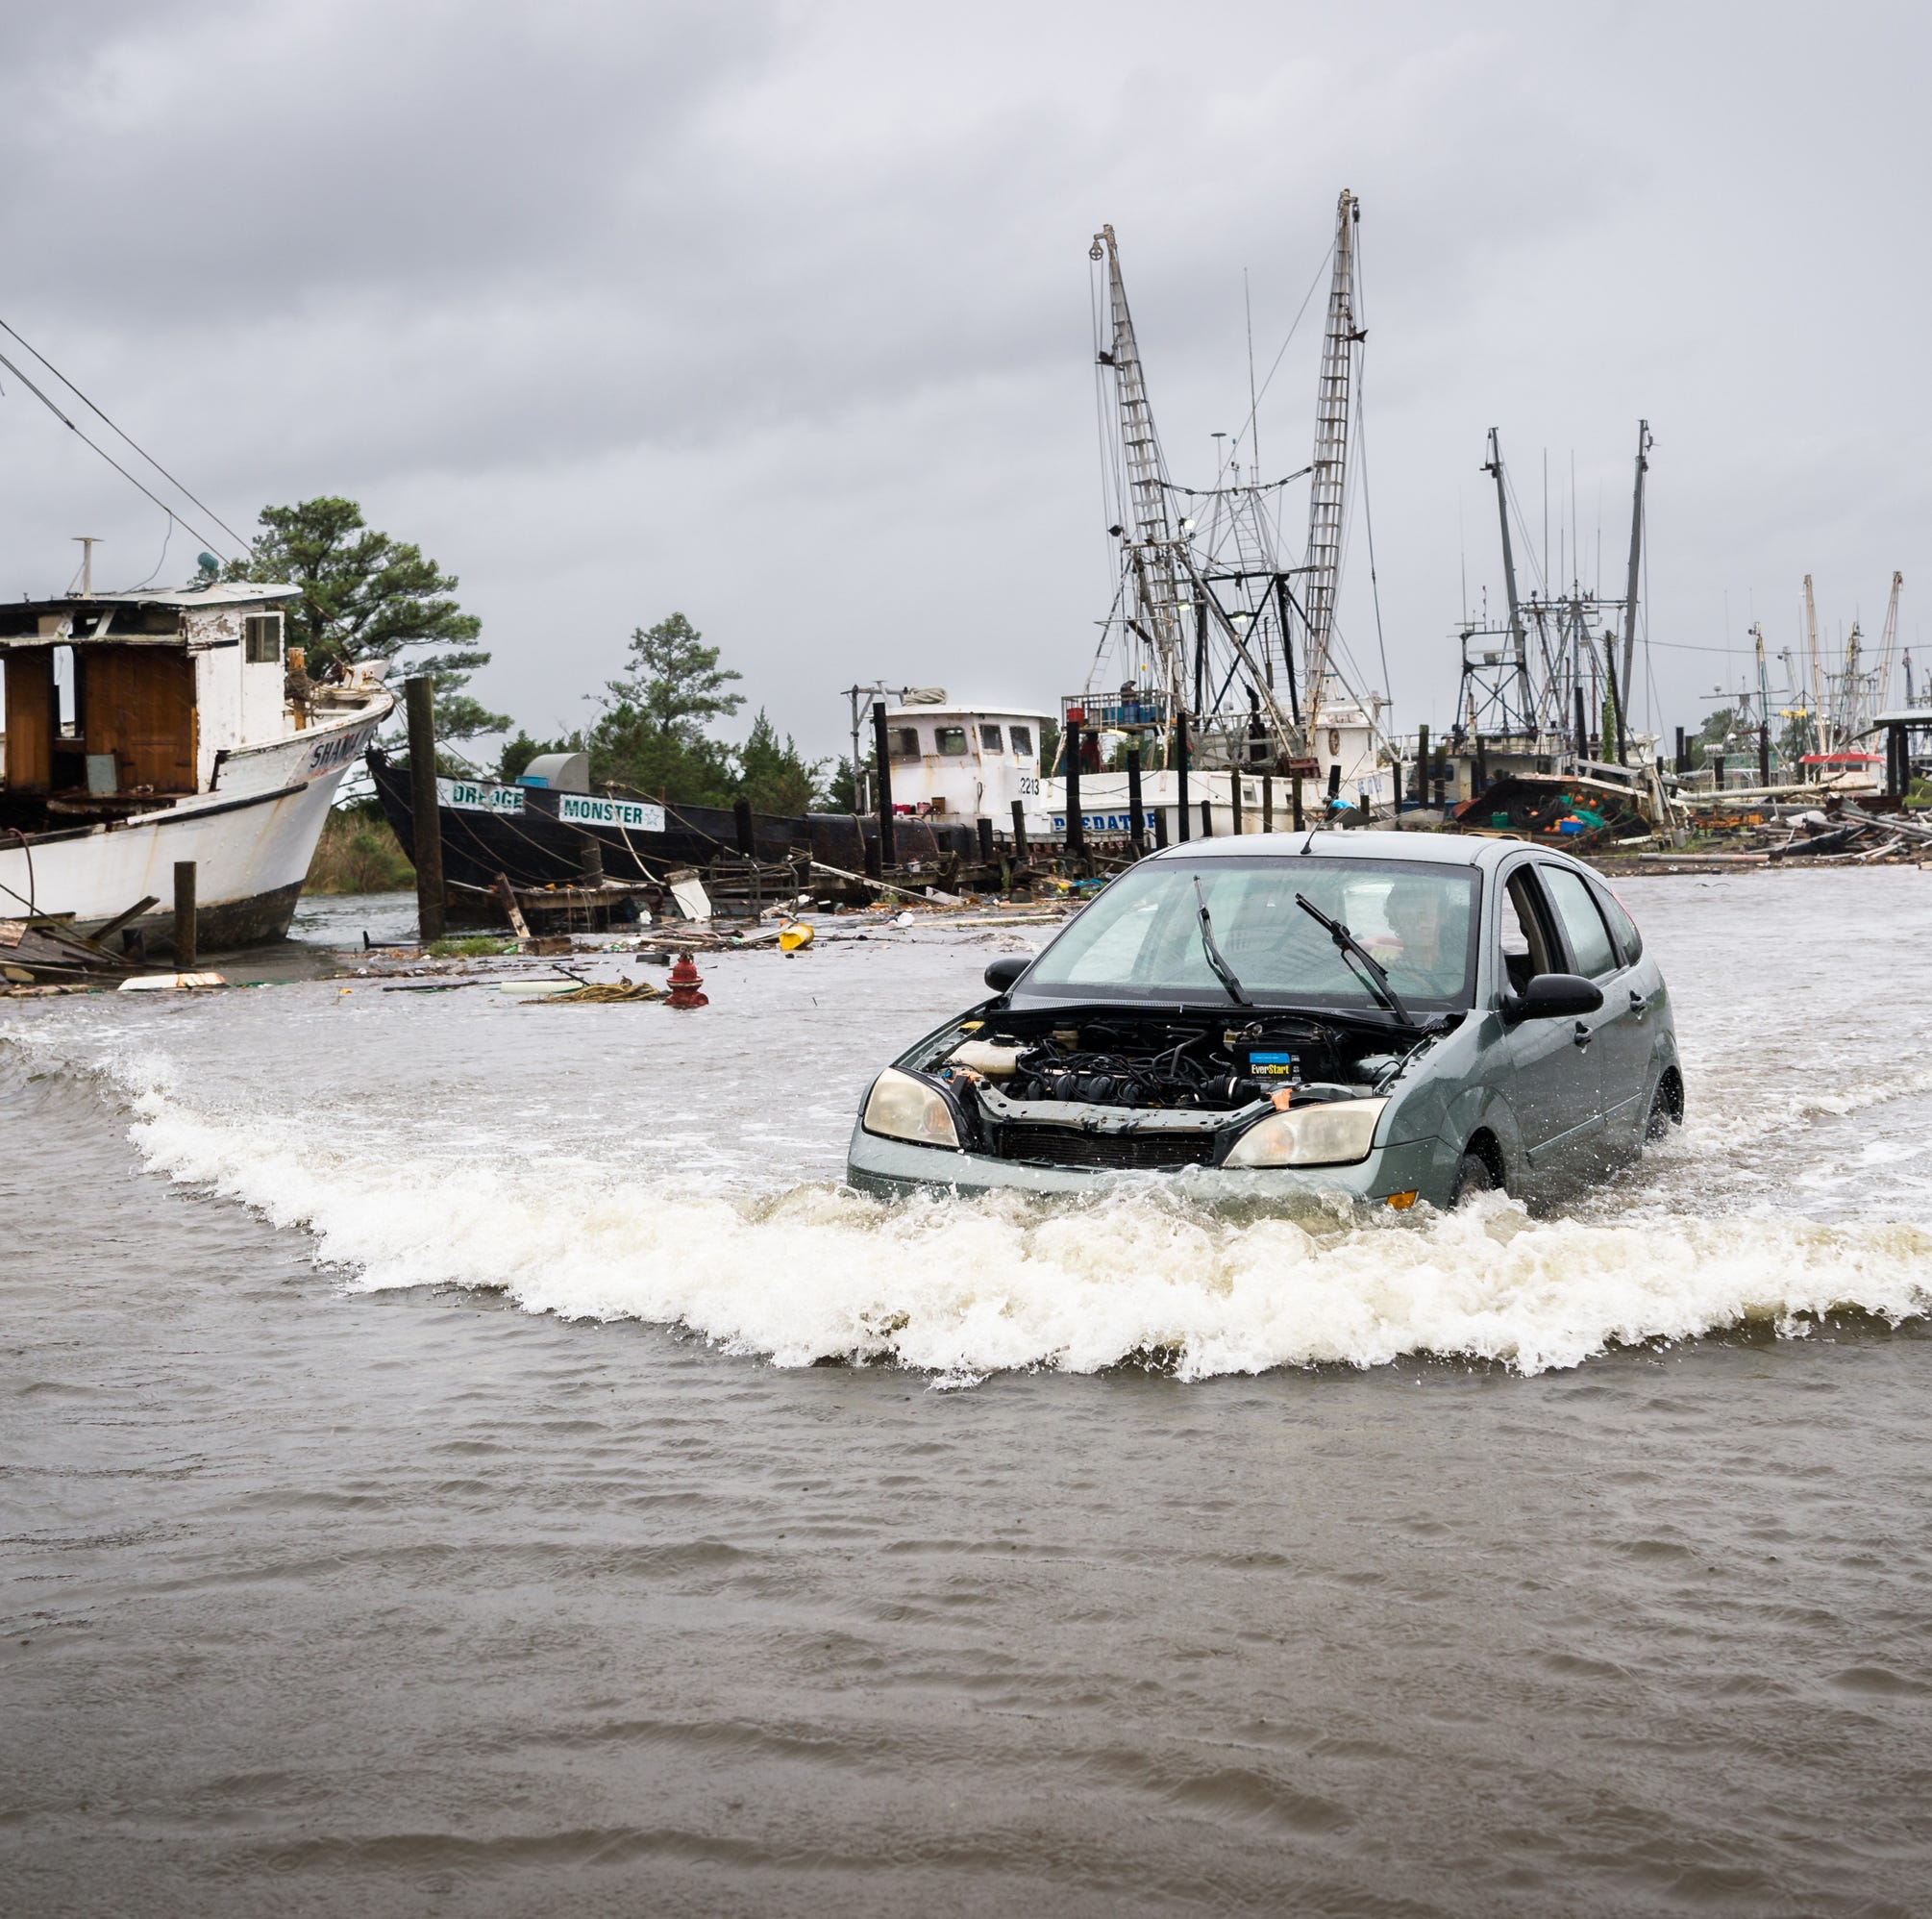 A motorist drives through a flooded area in the Swan Quarter harbor in Swan Quarter, North Carolina.